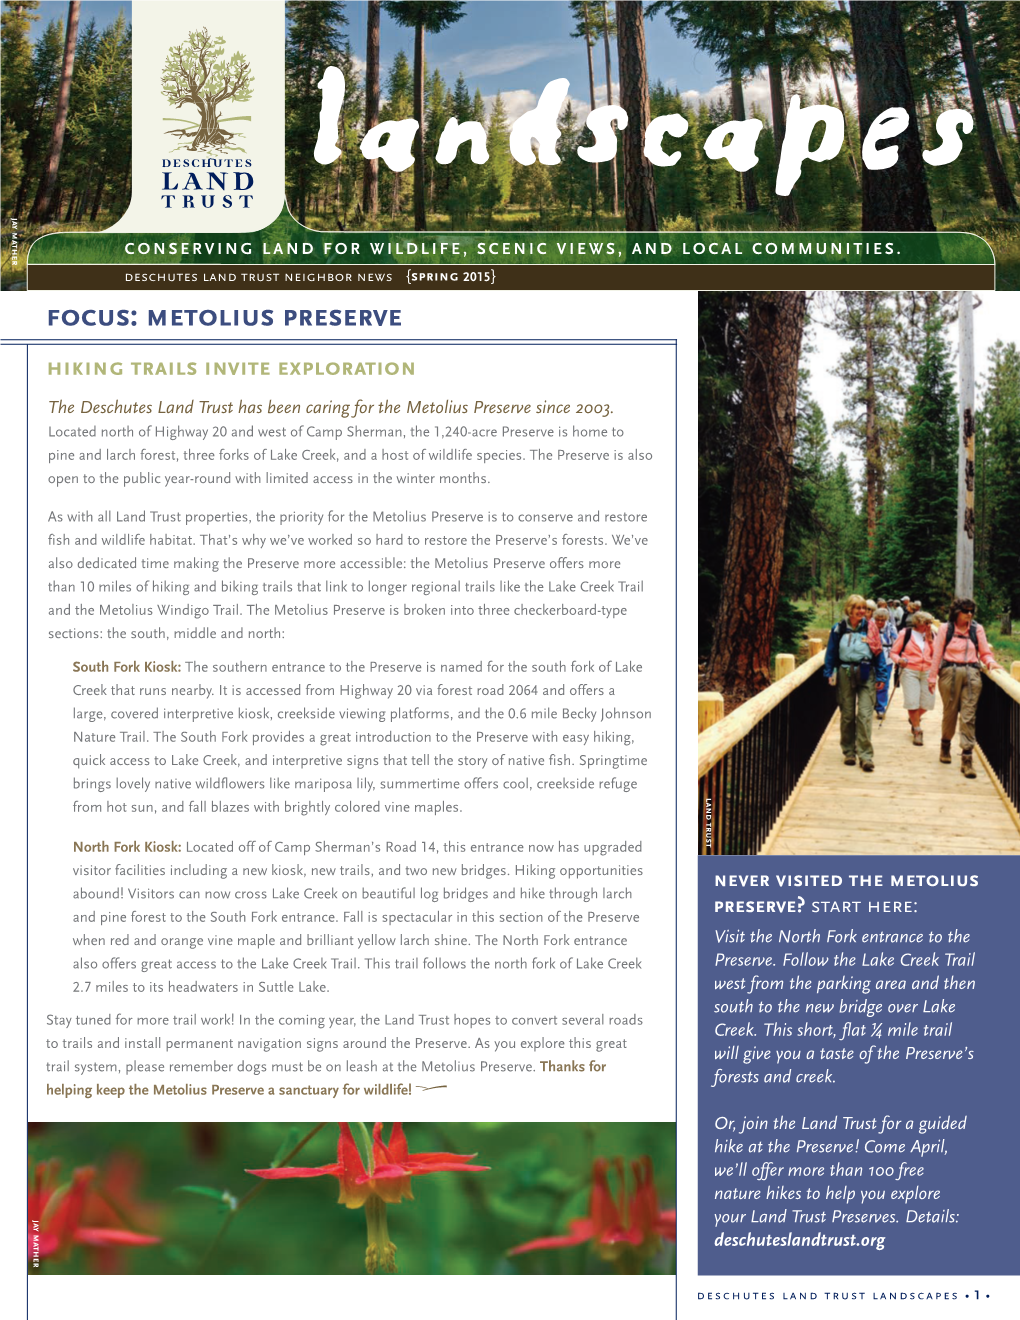 Metolius Preserve Hiking Trails Invite Exploration the Deschutes Land Trust Has Been Caring for the Metolius Preserve Since 2003